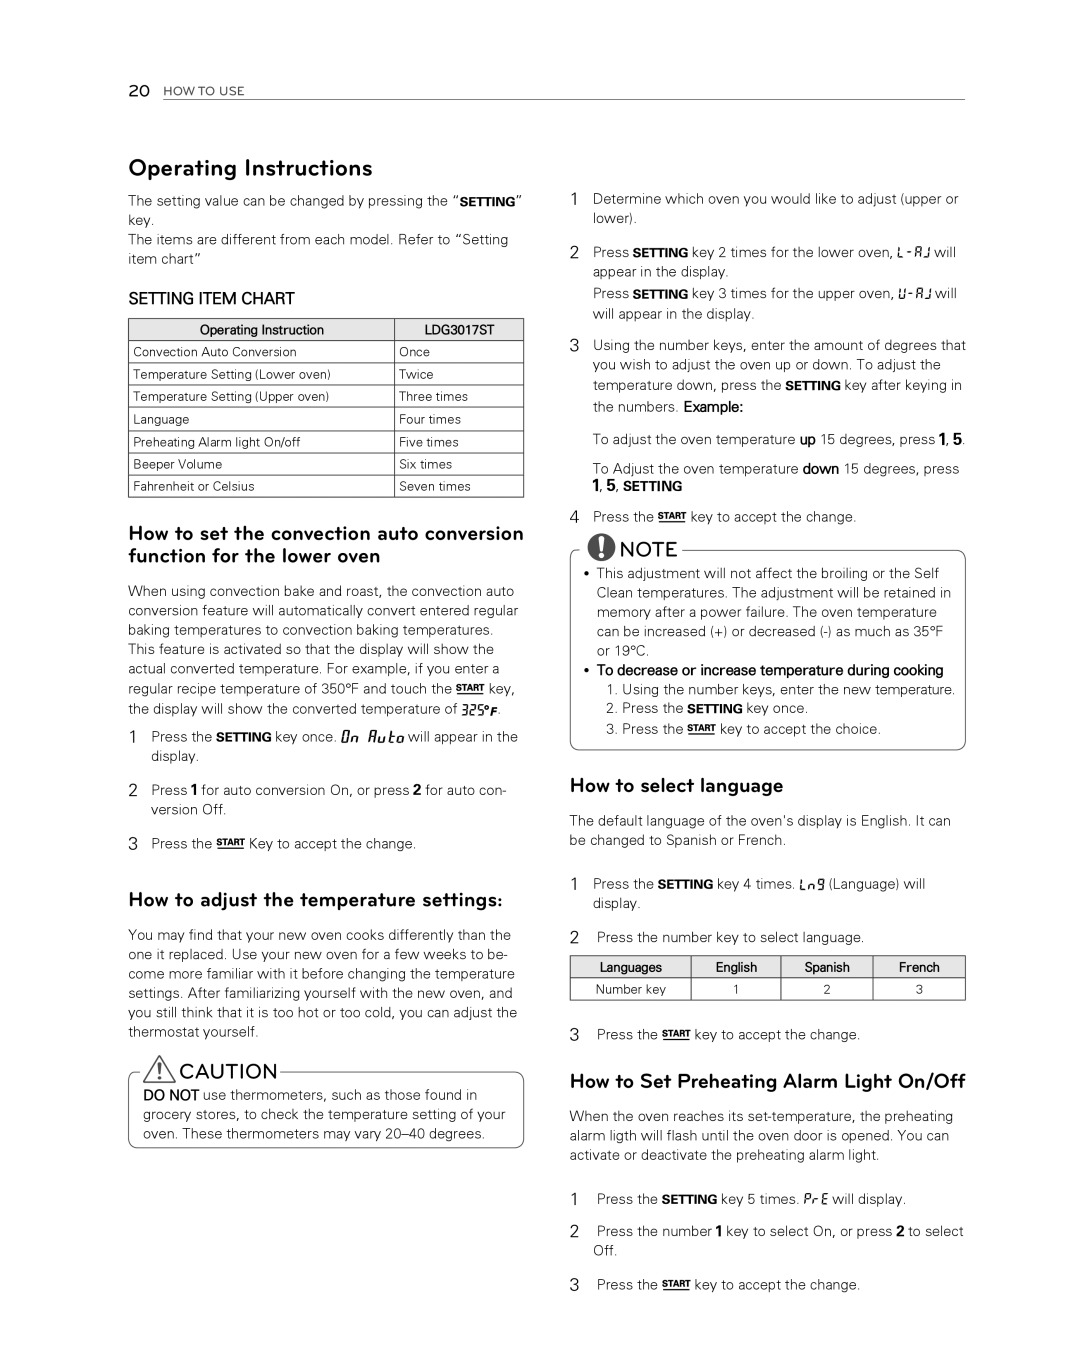 LG Electronics LDG3017ST Operating Instructions, How to set the convection auto conversion function for the lower oven 